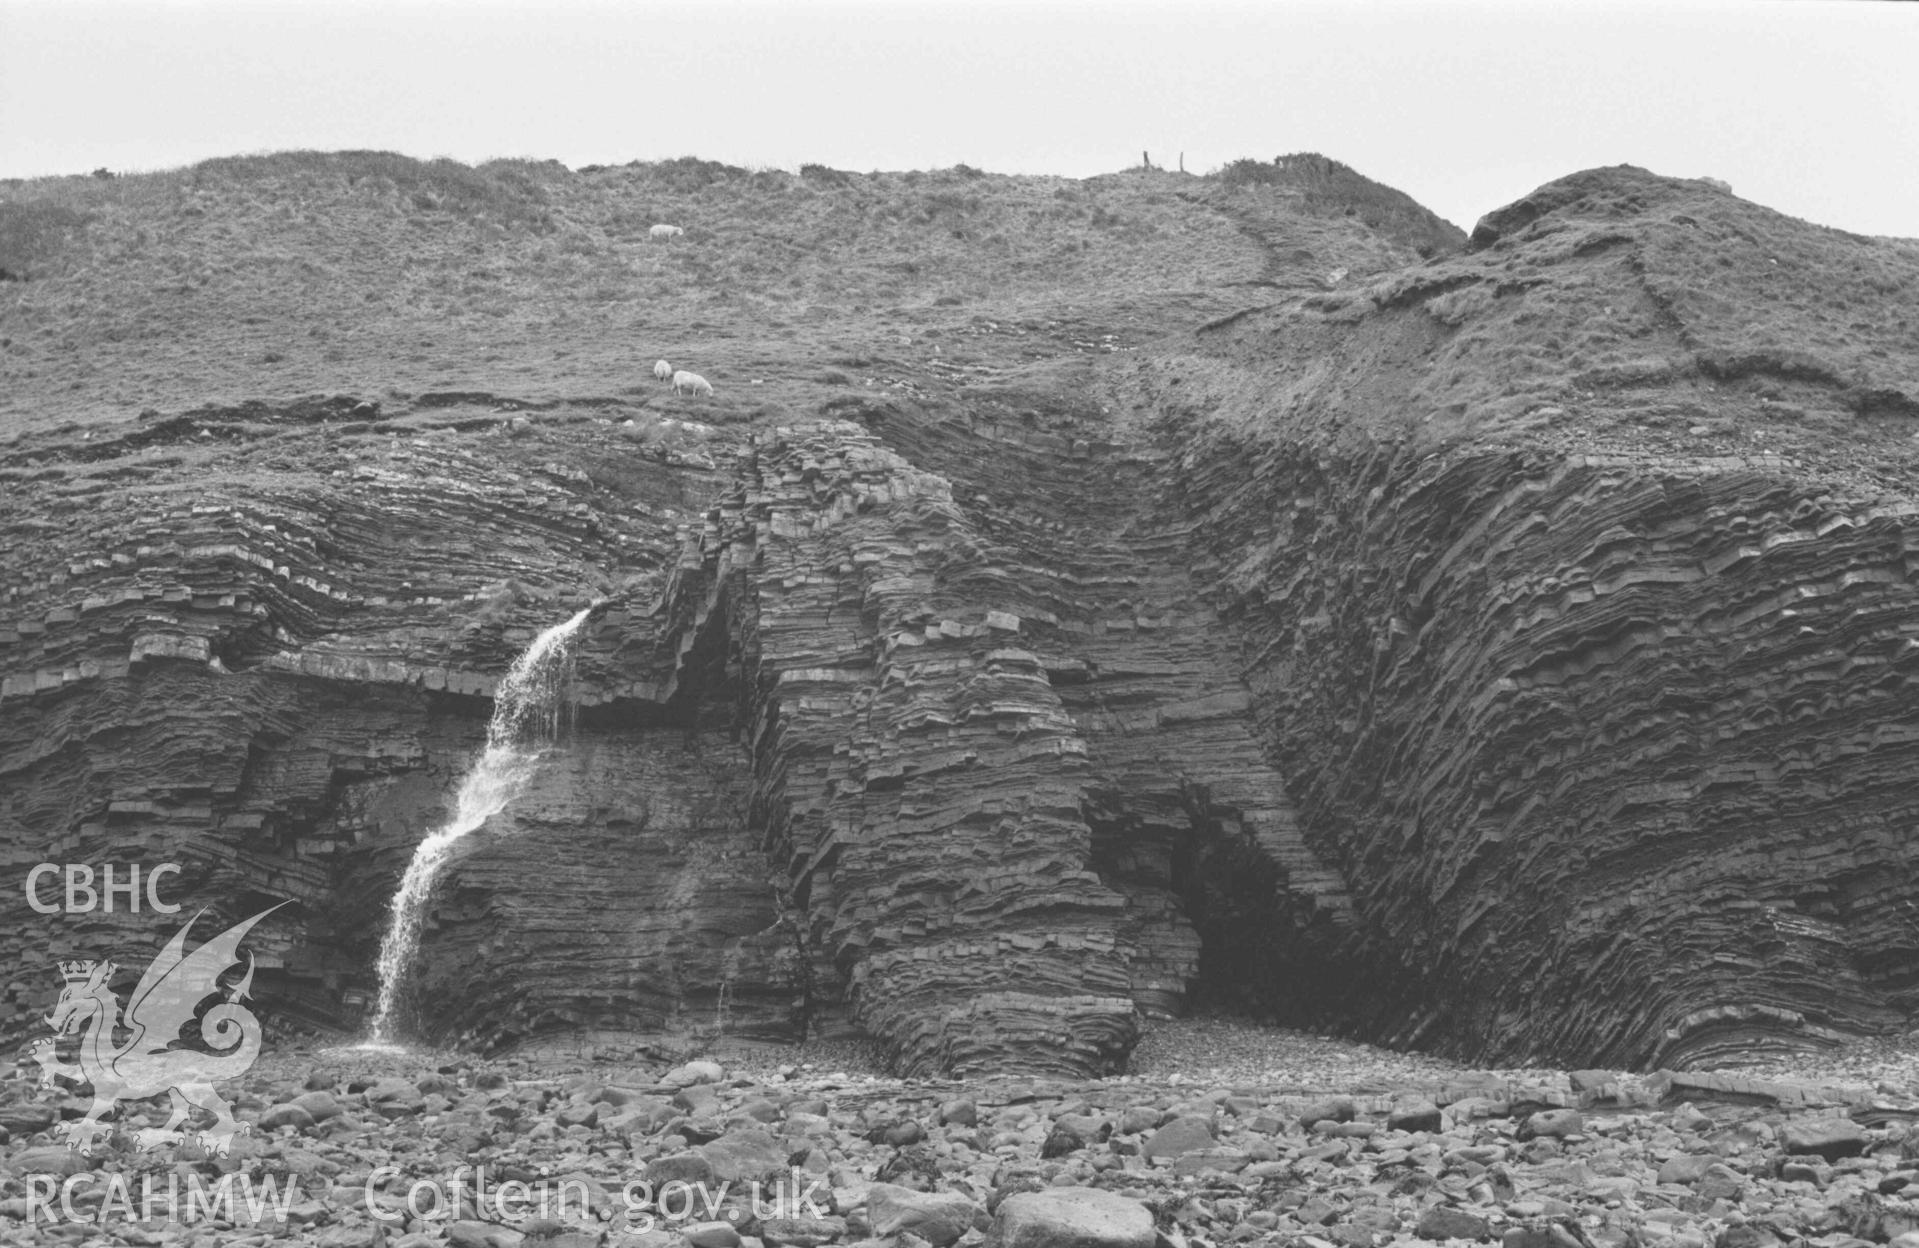 Digital copy of a black and white negative showing Ffos y Ffin emerging from Cwm Gilfach onto the beach; low tide. Photographed by Arthur Chater on 3 January 1969. Looking south east from Grid Reference SN 4388 6175.